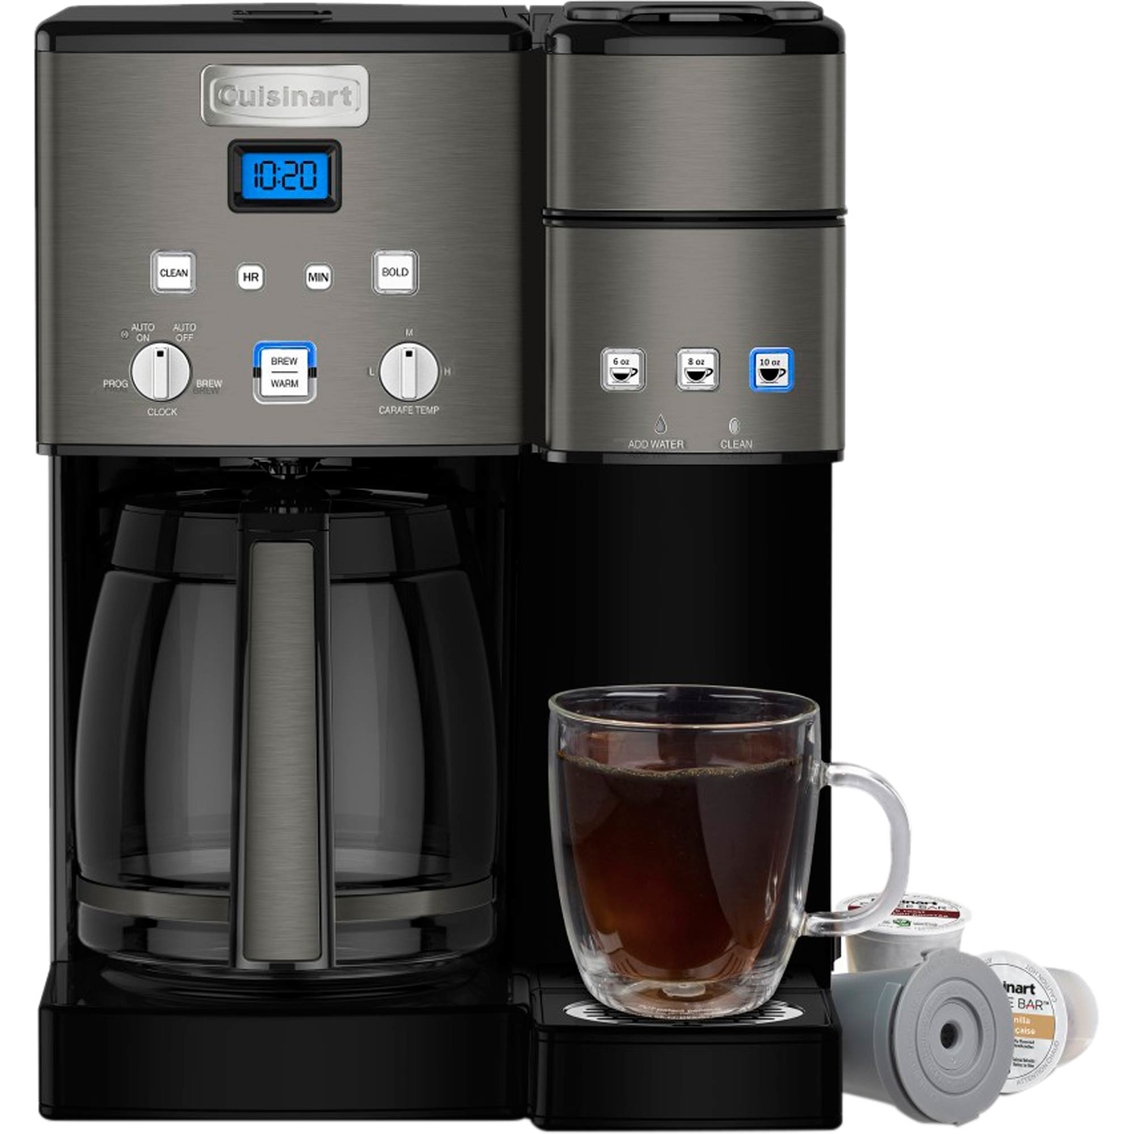 Cuisinart Coffee Center: Single-Serve Coffee Maker with Thermal Carafe